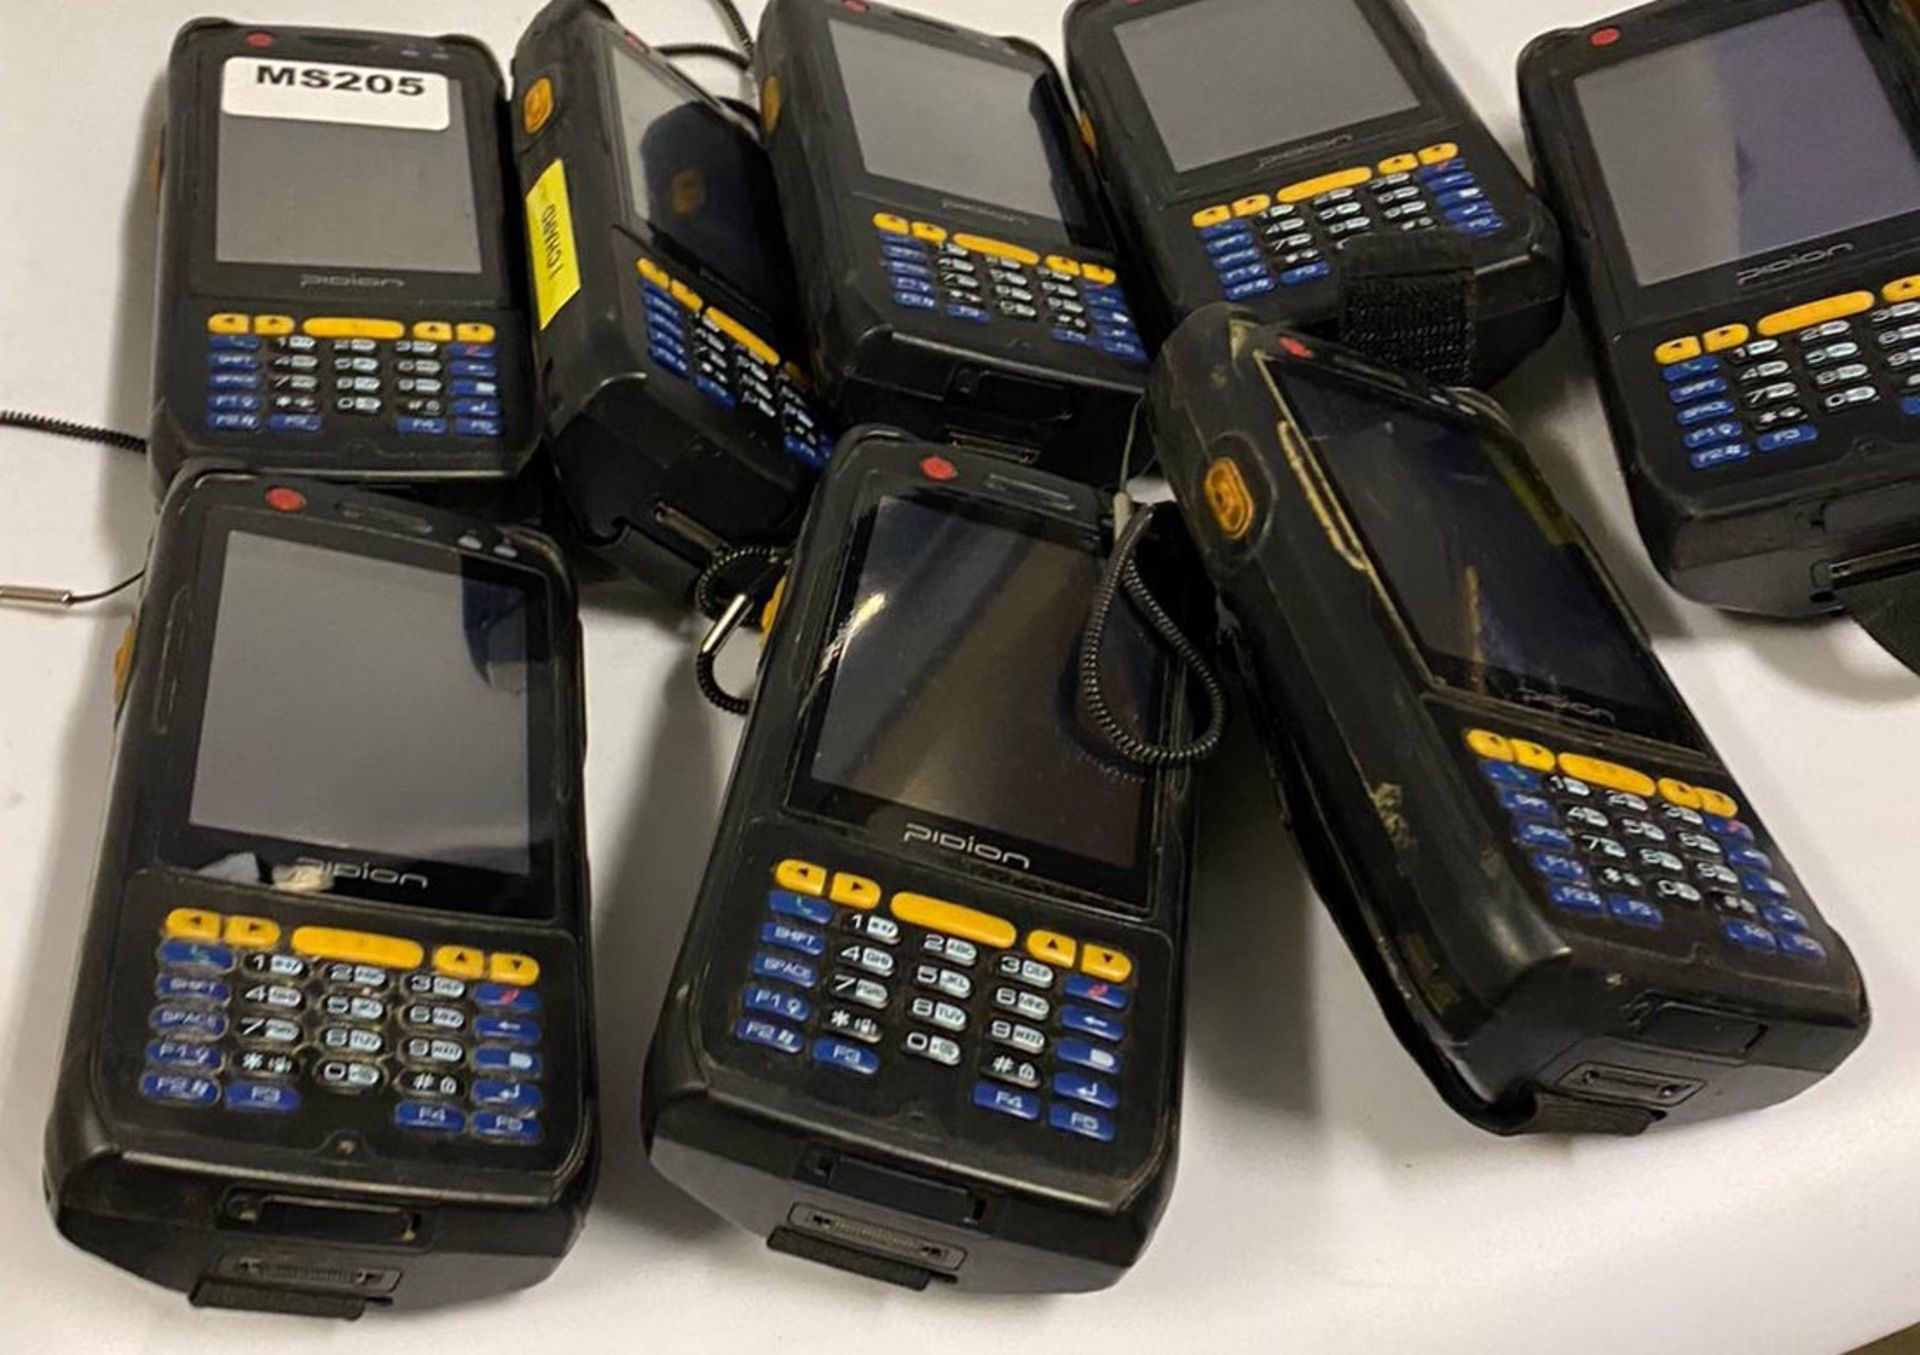 8 x Pidion BIP-6000 Handheld Mobile Computer With Barcode Scanning Capability - Used Condition - - Image 4 of 5